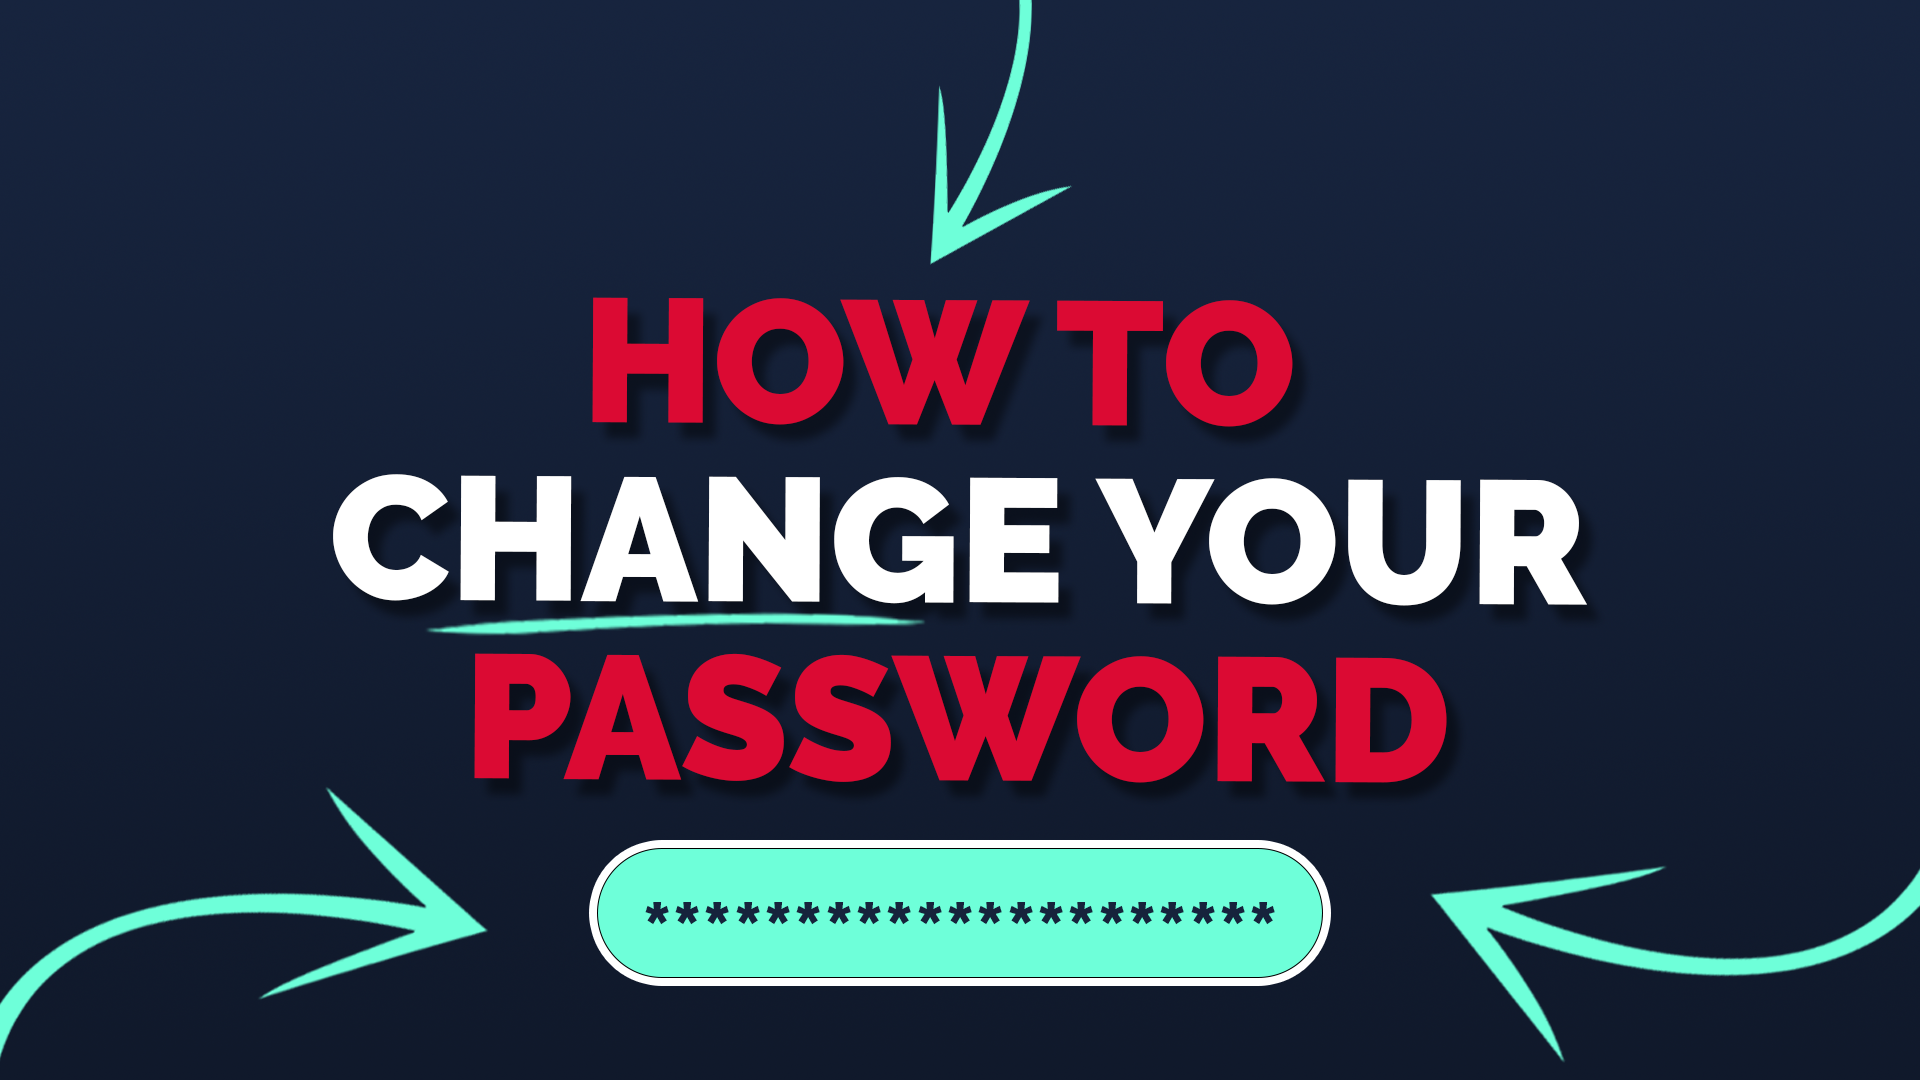 HOW TO Change you password